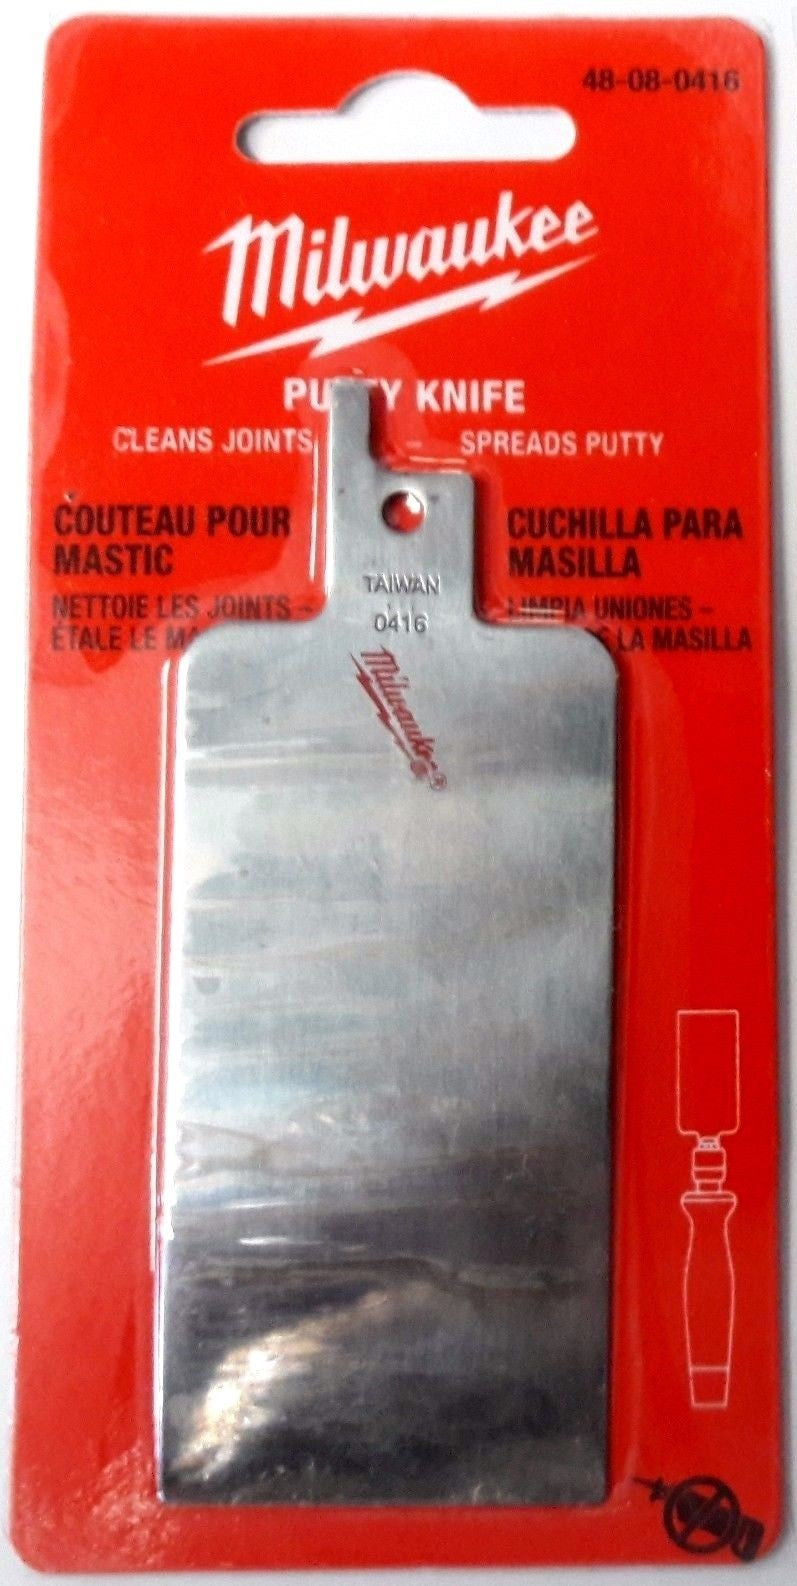 Milwaukee Putty Knife 48-08-0416 For Job Saw Handle Only